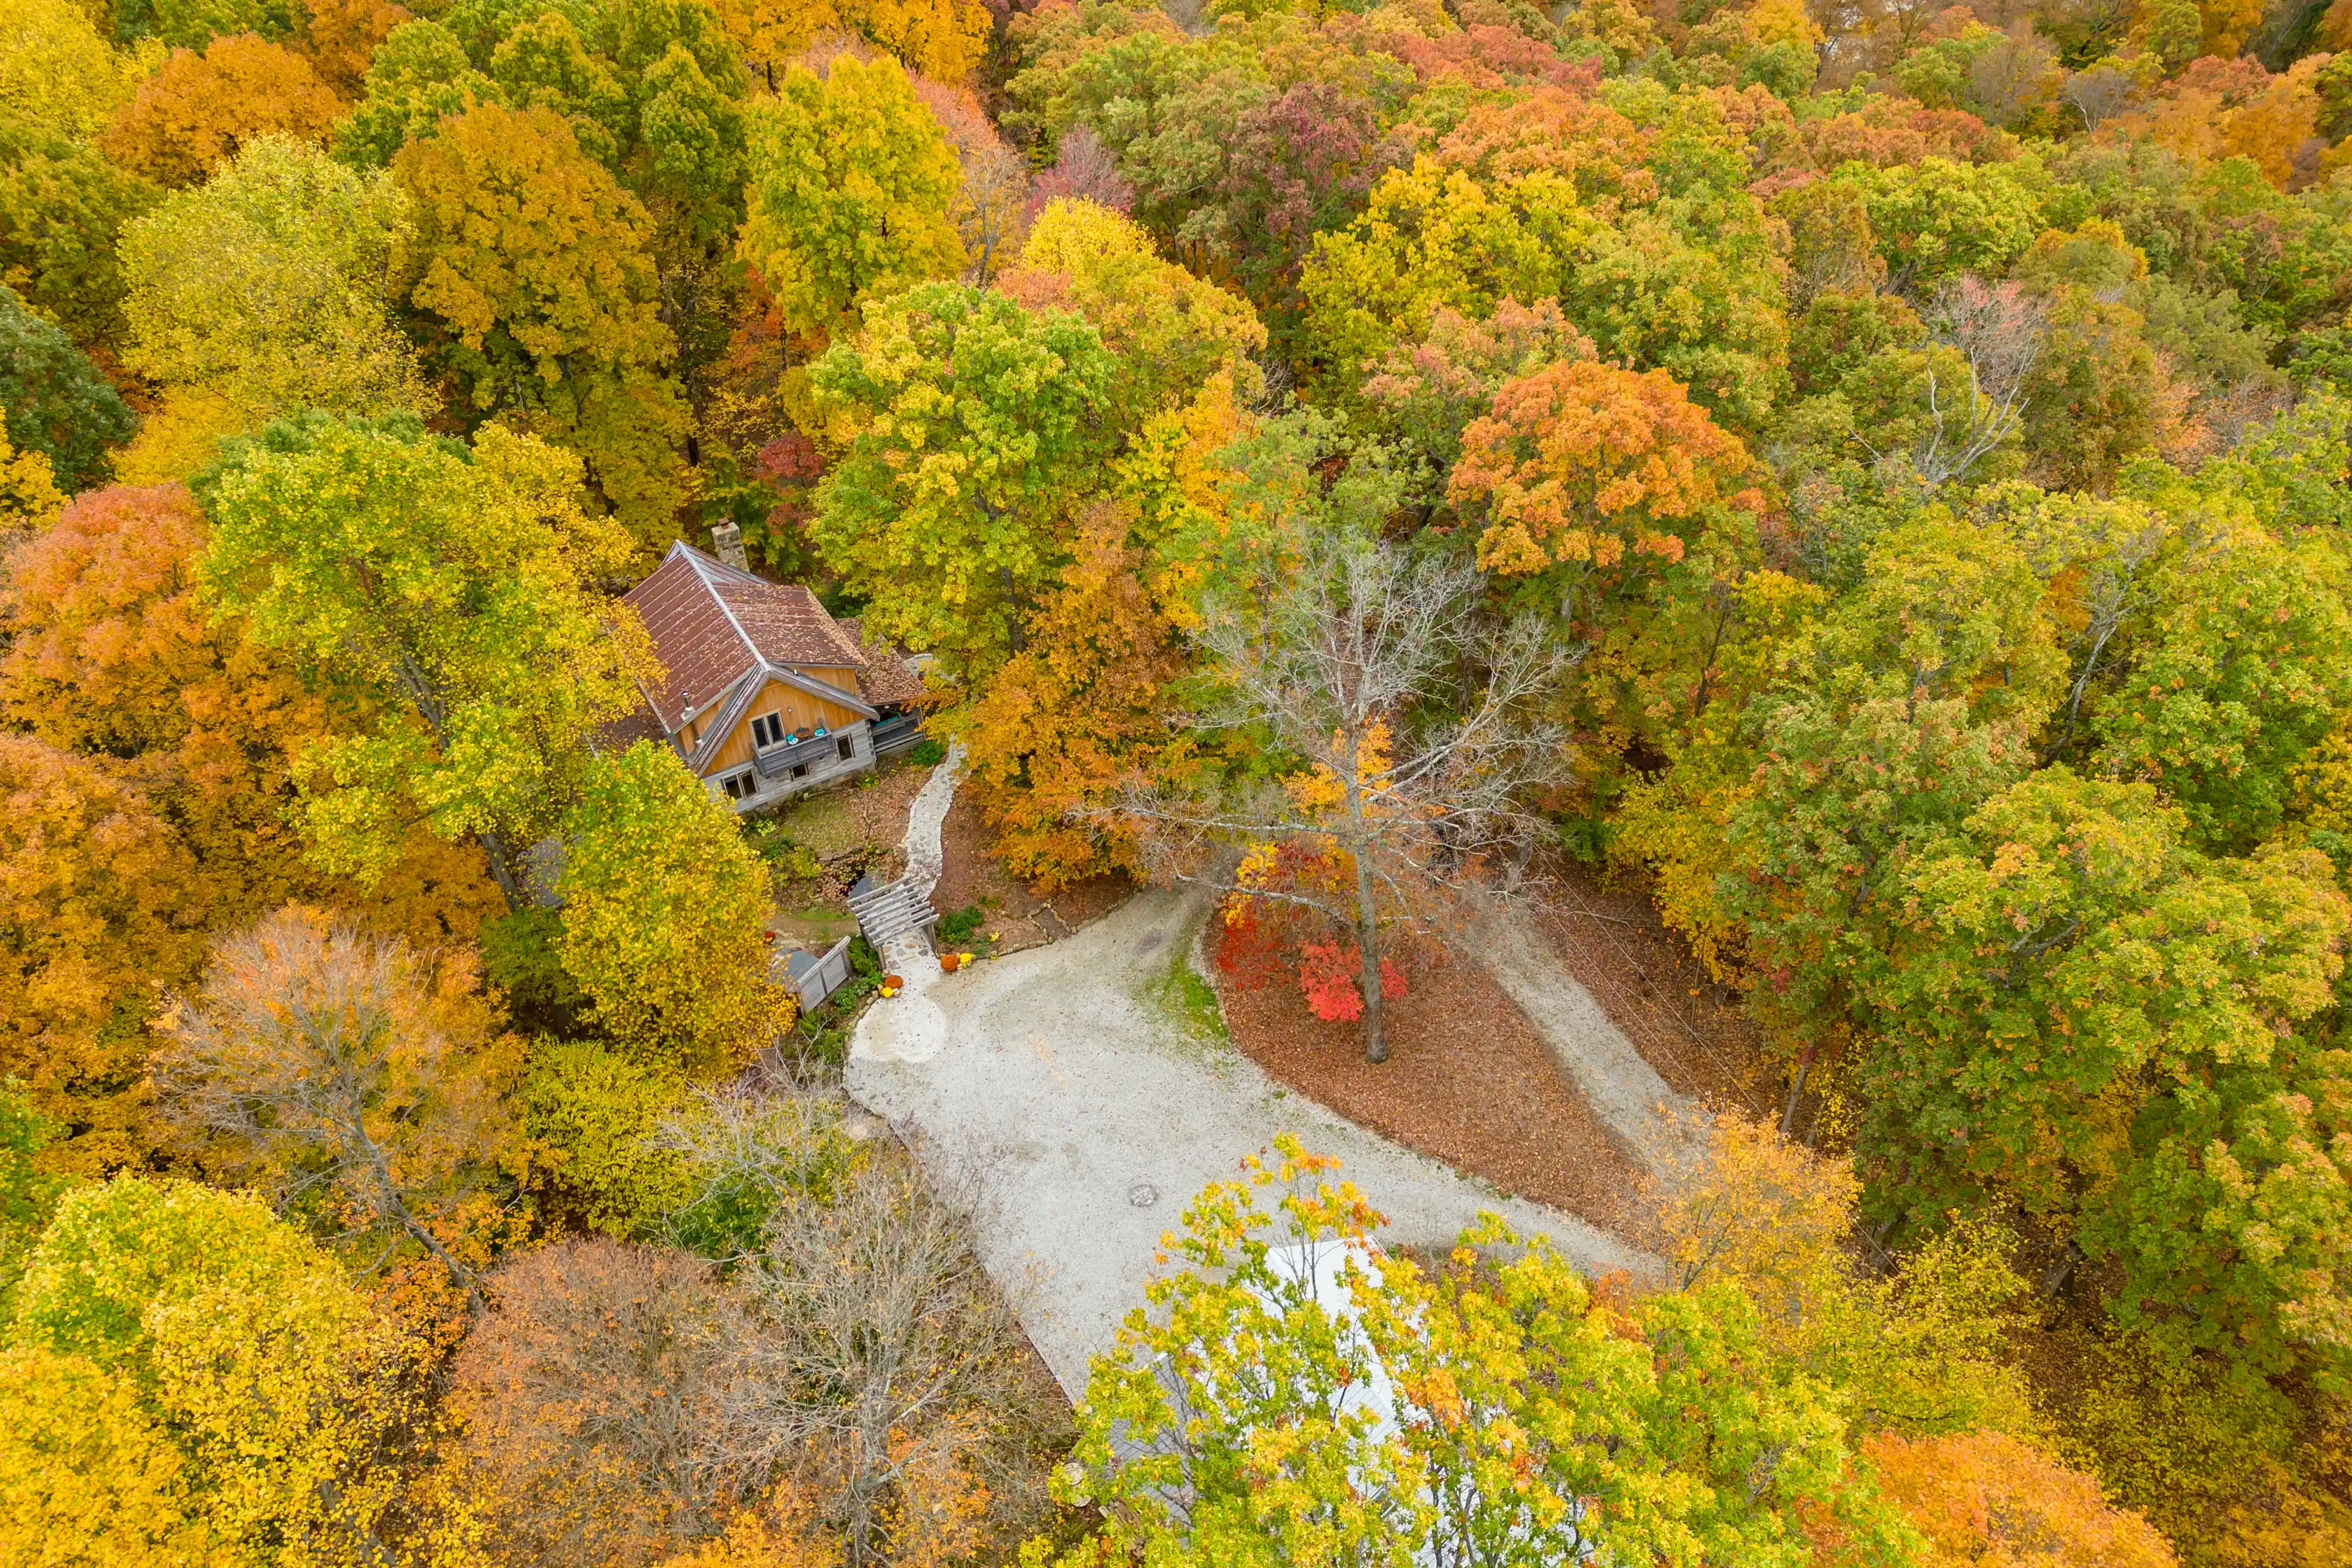 Aerial view of a house surrounded by a forest with colorful autumn foliage.